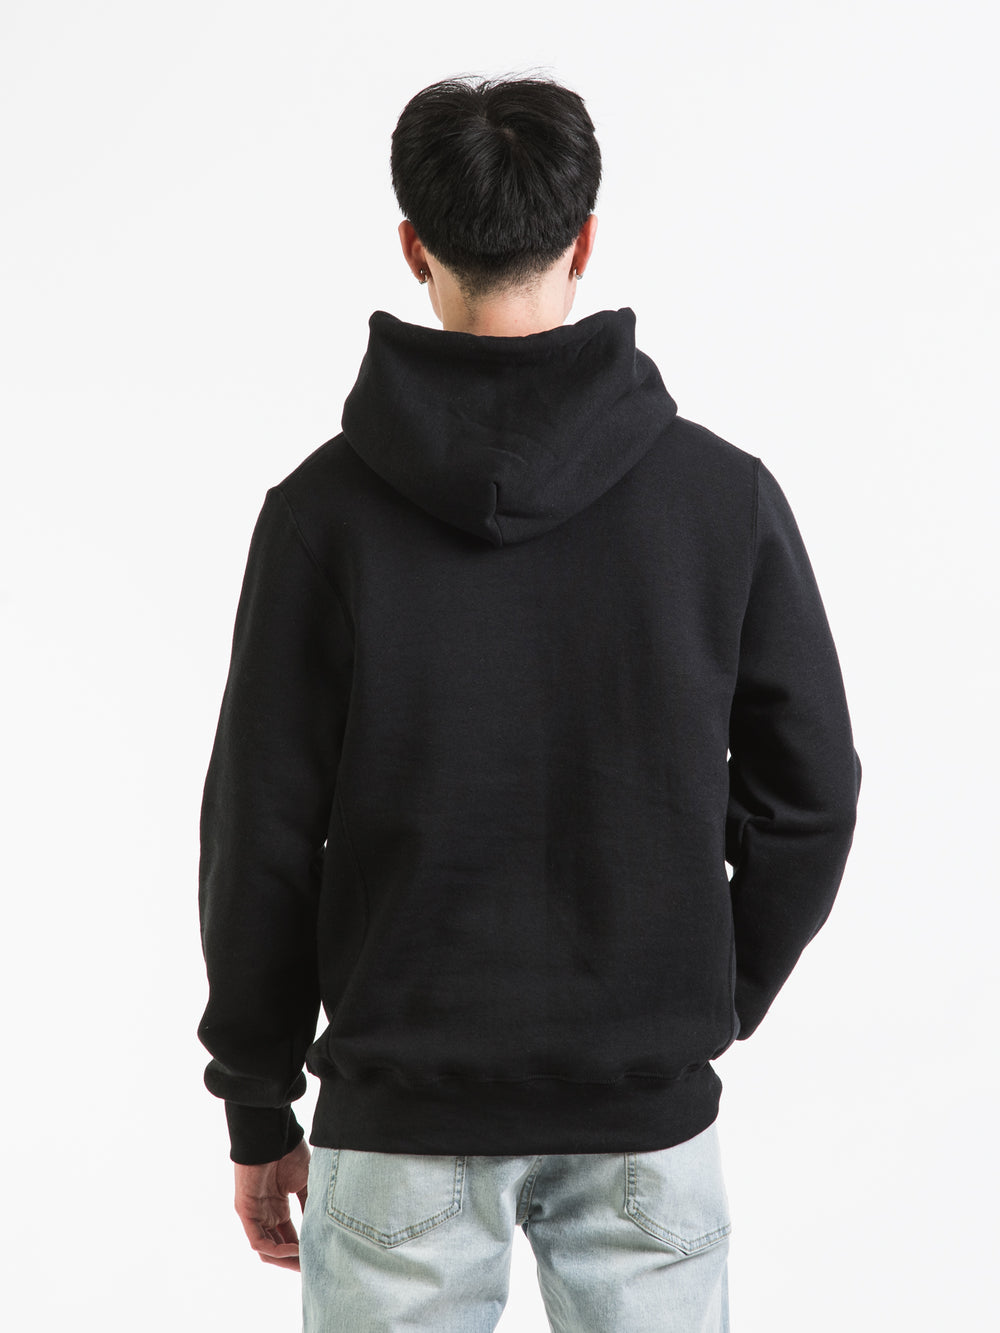 RUSSELL FLORIDA TONAL PULLOVER HODDIE - CLEARANCE